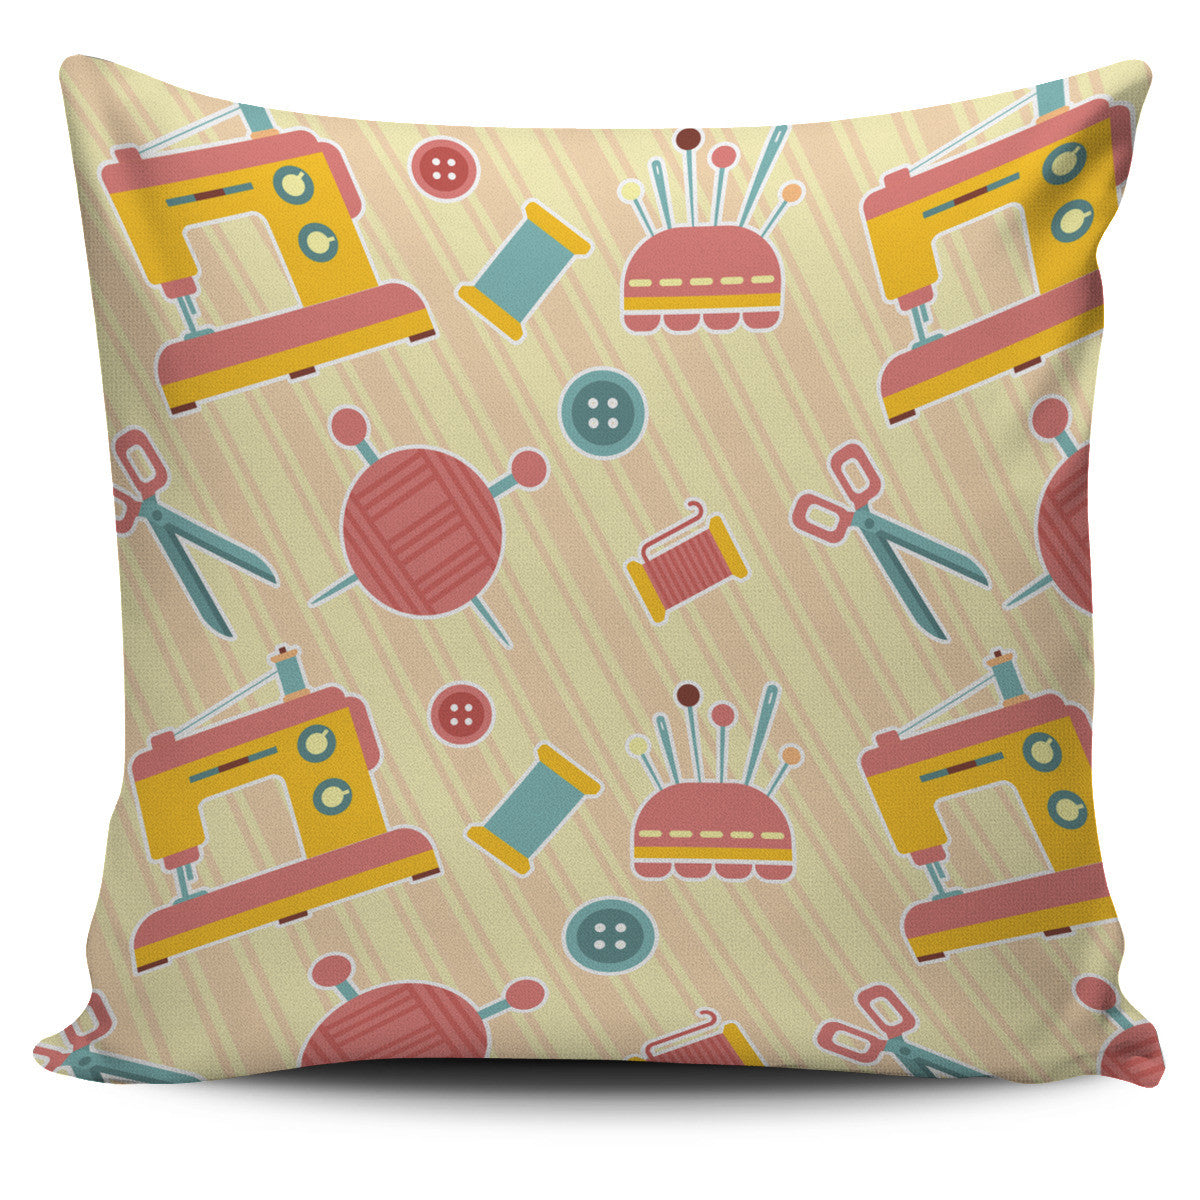 Sewing Pillow Cover